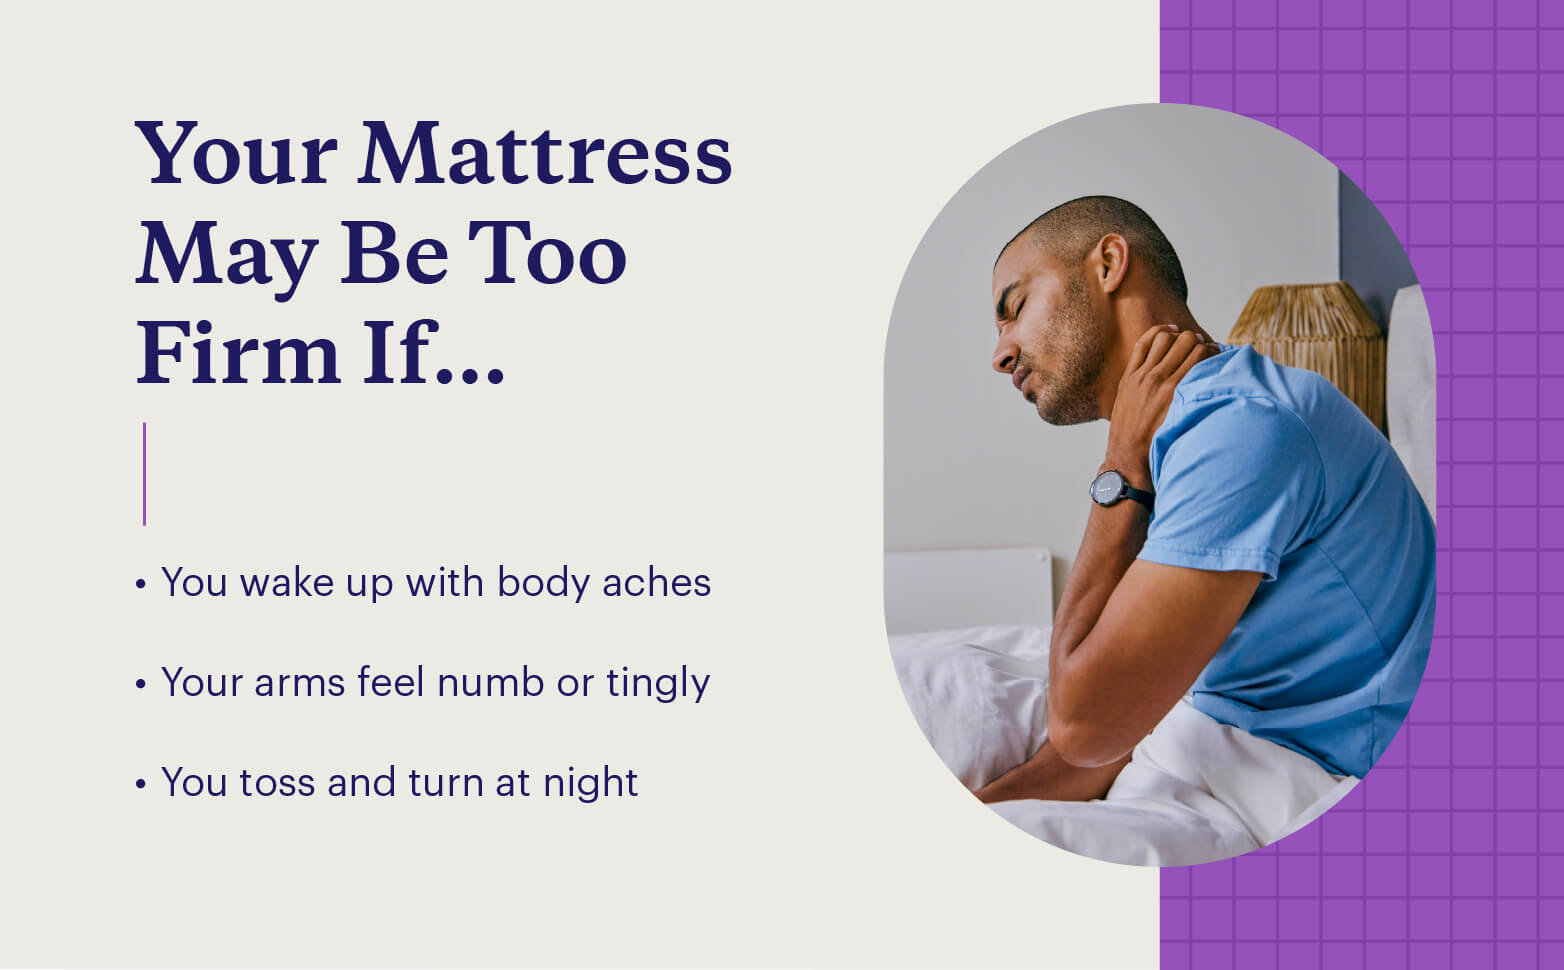 Ways to tell if your mattress is too firm